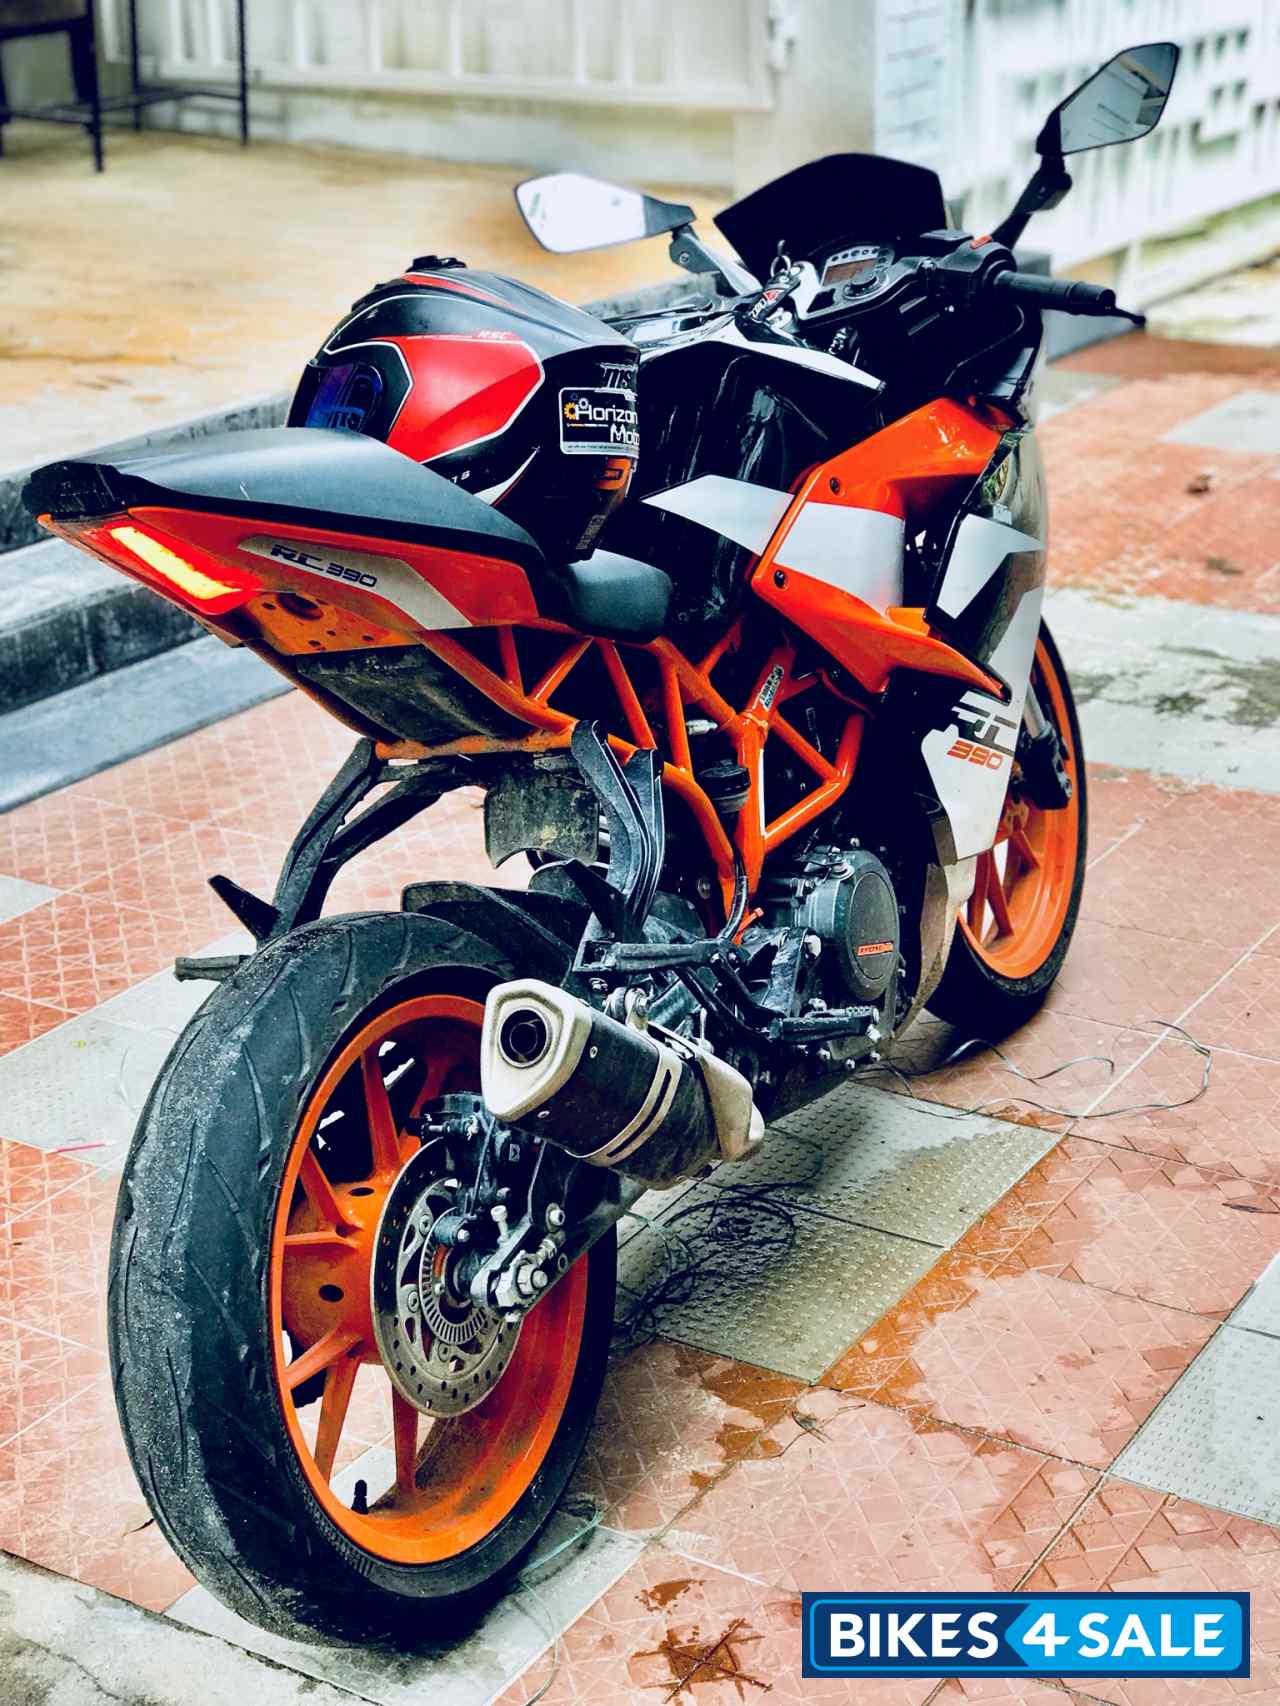 Used 2017 model KTM RC 390 for sale in Hyderabad. ID 155520. Black ...